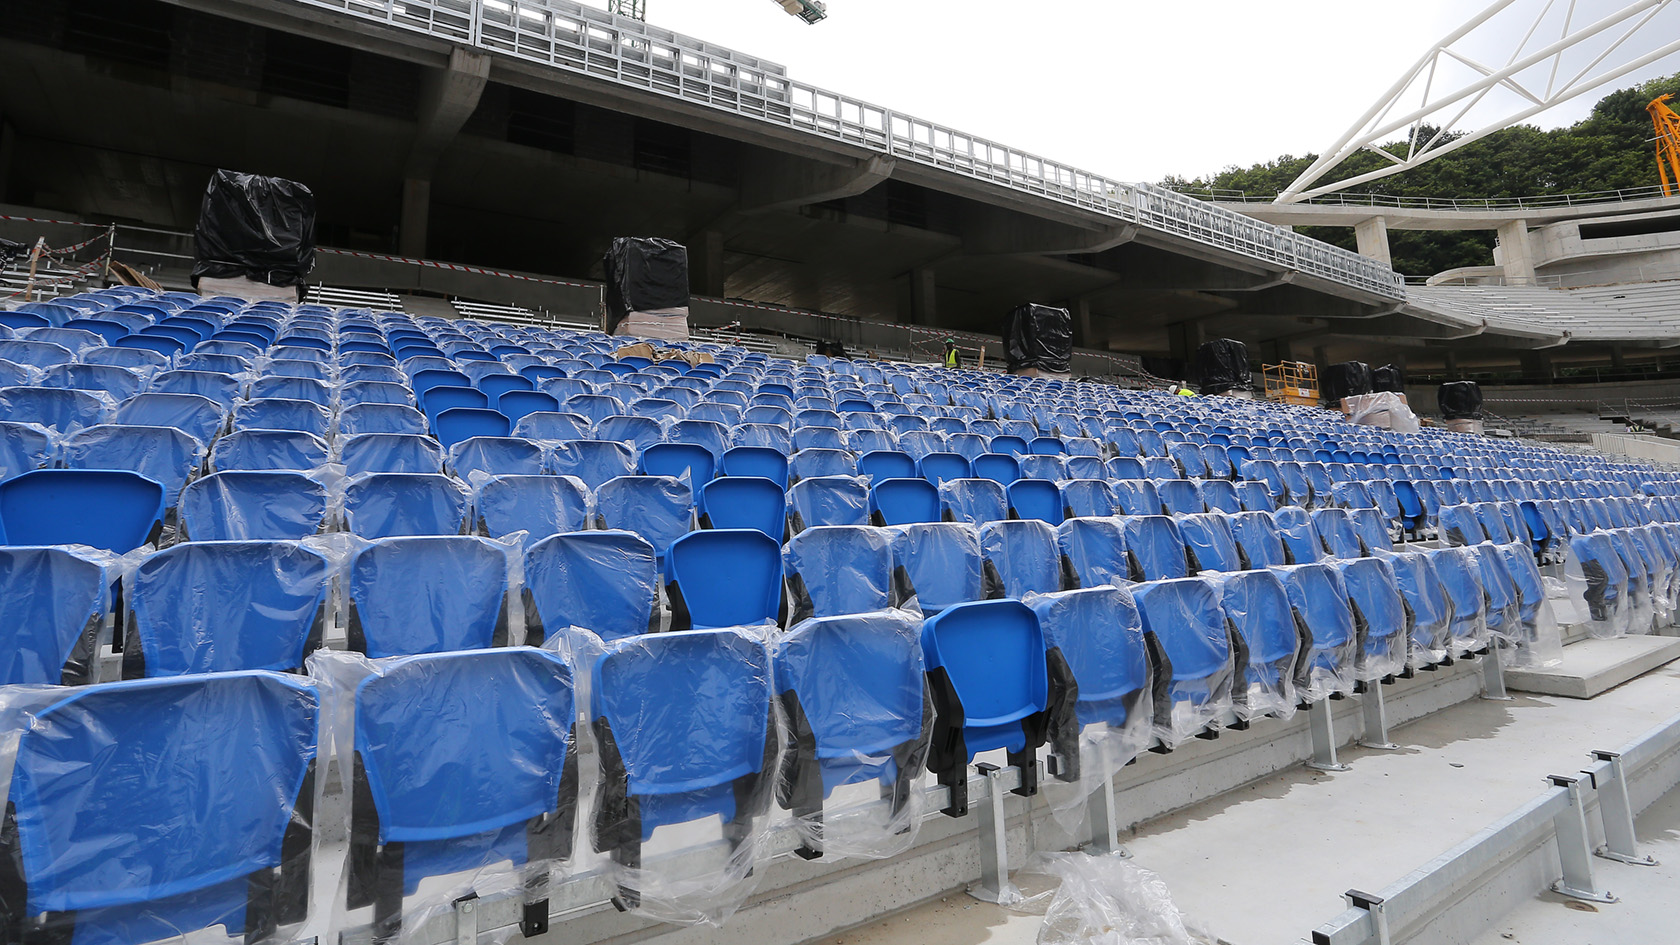 The south stand is taking shape